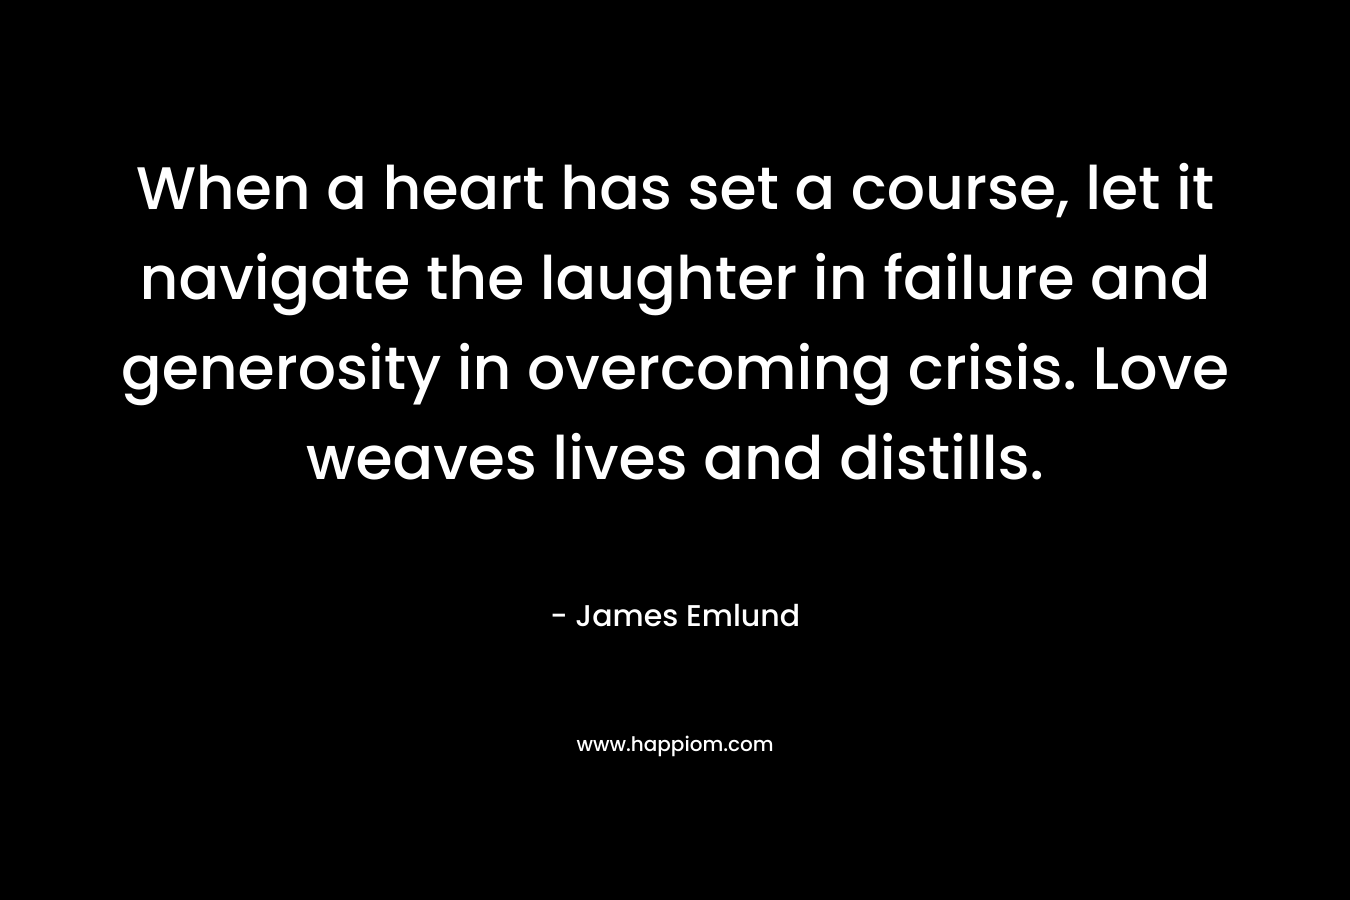 When a heart has set a course, let it navigate the laughter in failure and generosity in overcoming crisis. Love weaves lives and distills. – James Emlund